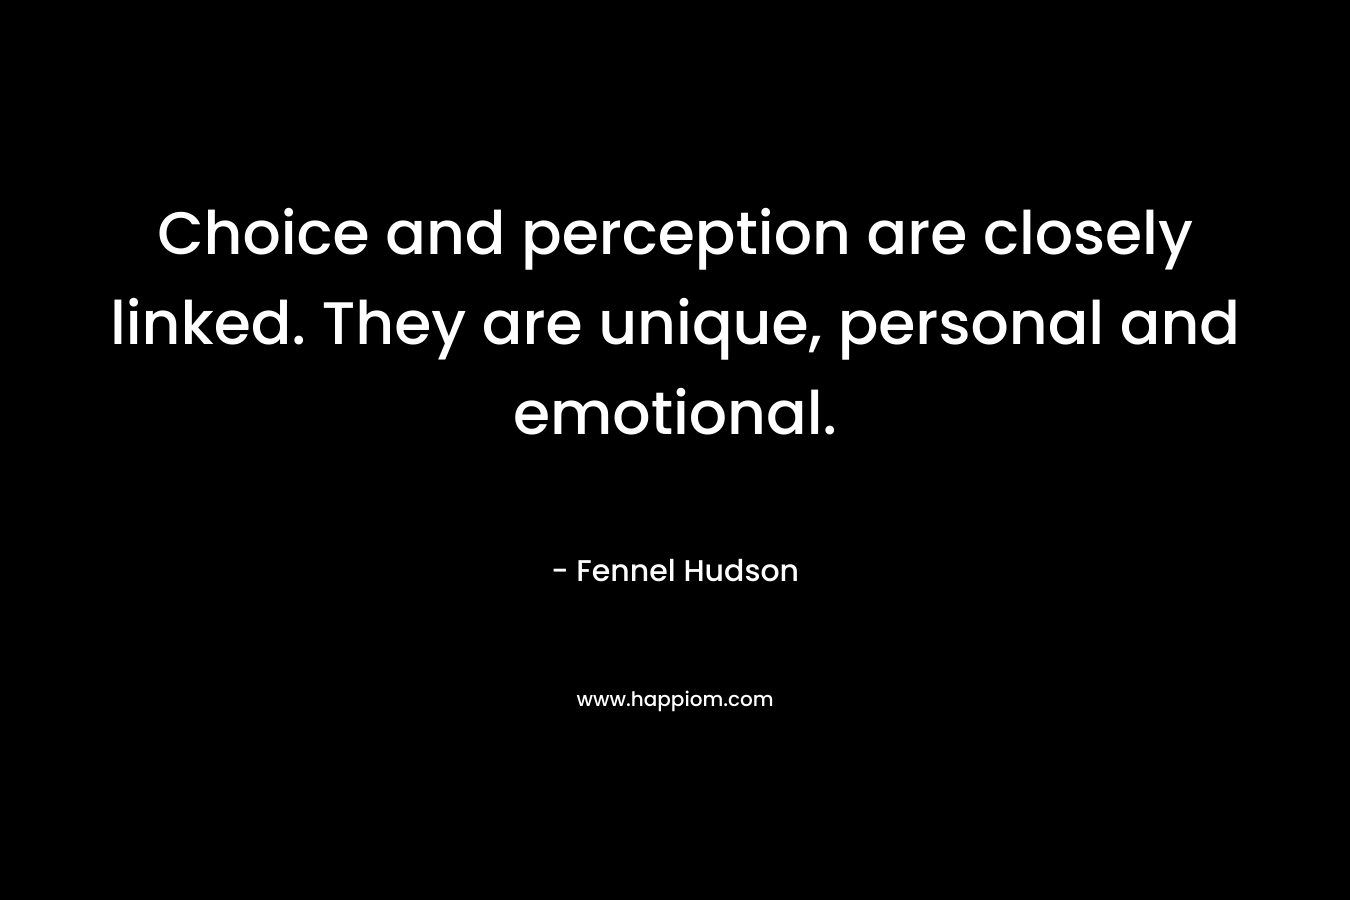 Choice and perception are closely linked. They are unique, personal and emotional. – Fennel Hudson